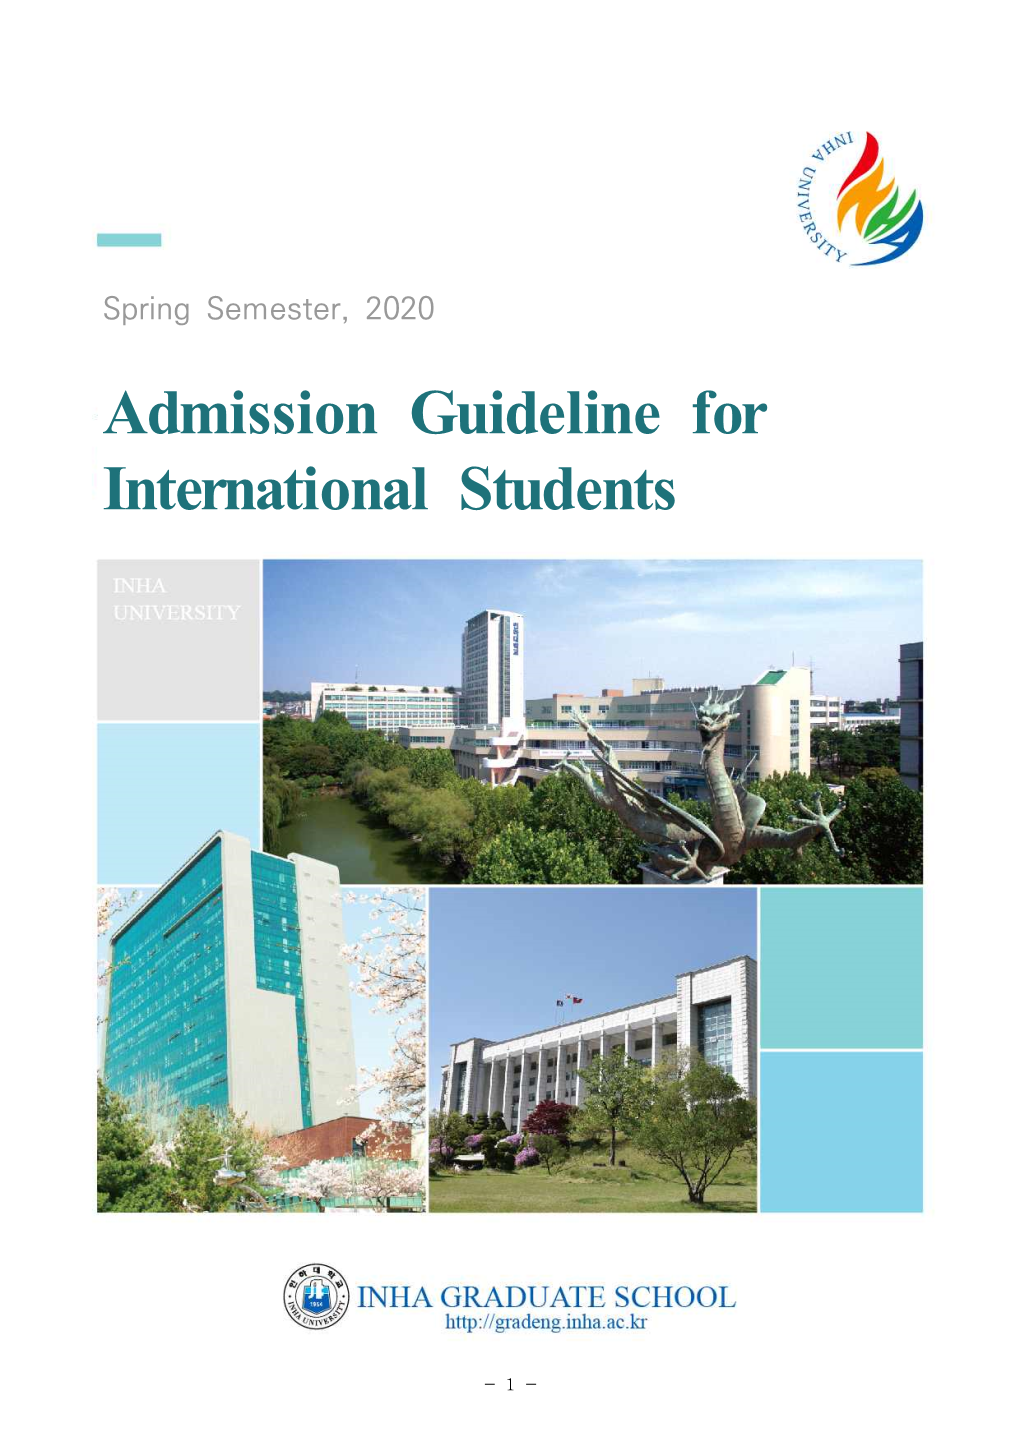 Admission Guideline for International Students